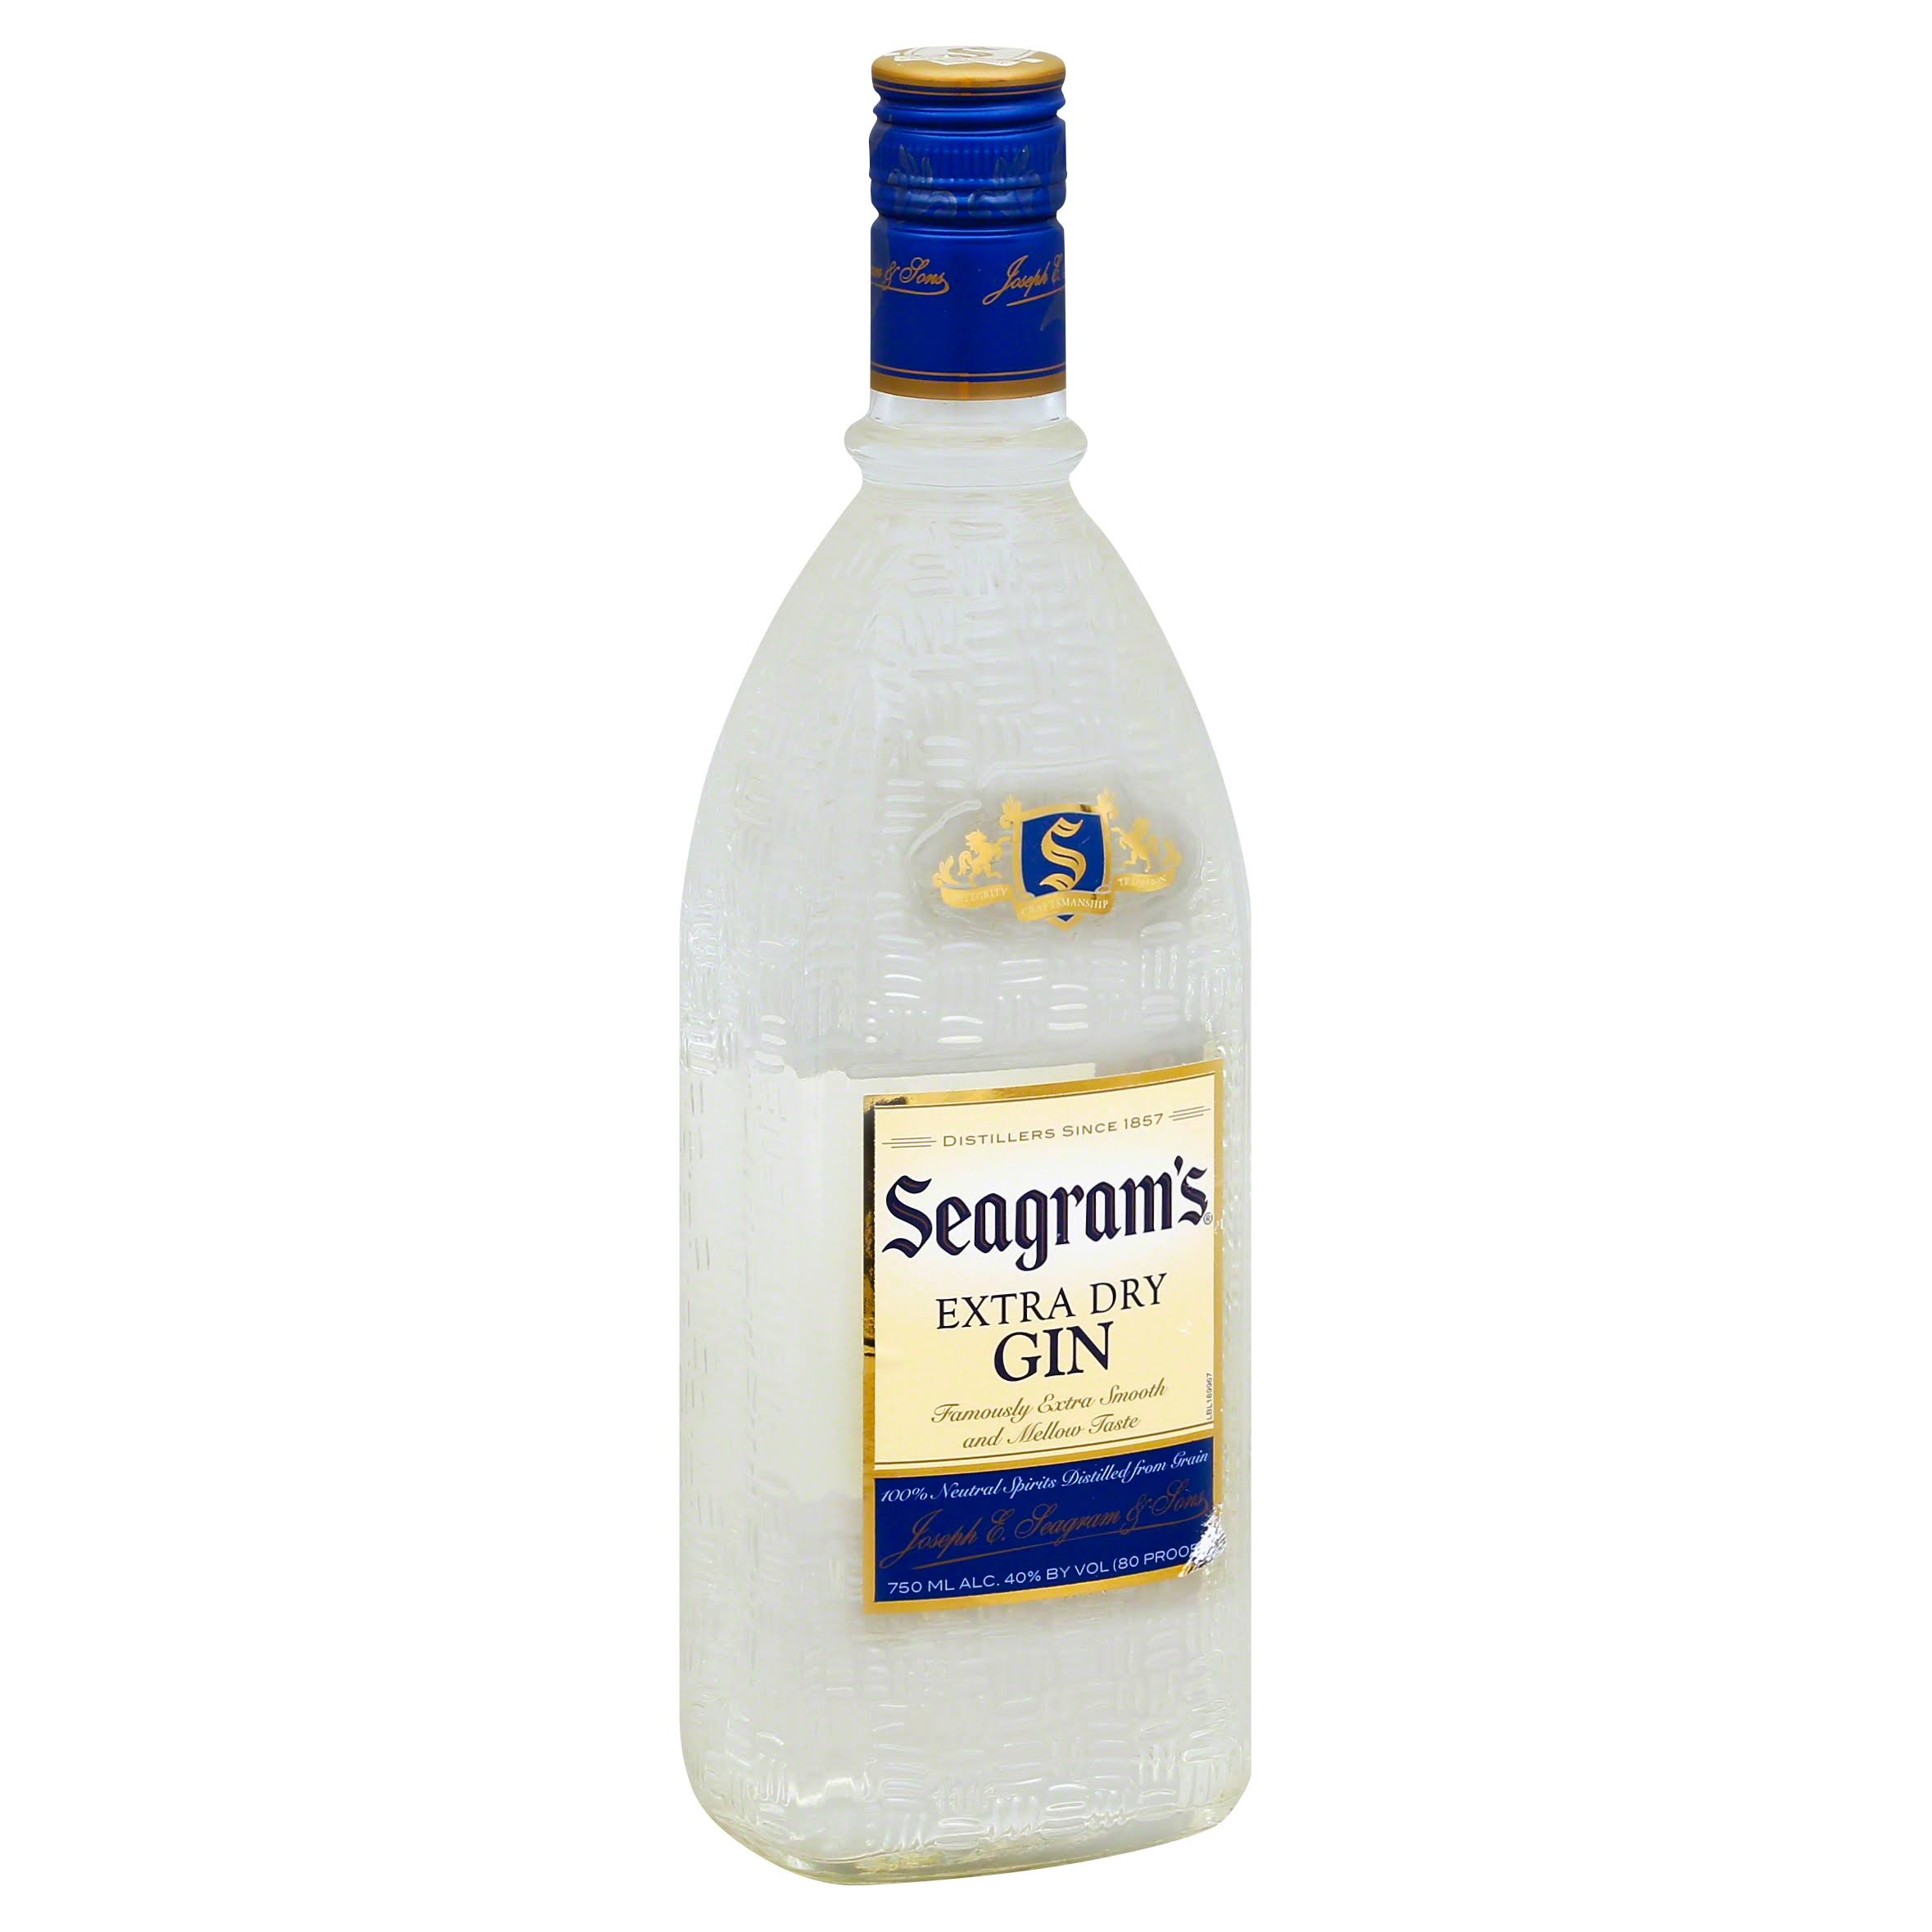 Seagram's Extra Dry Gin - 700ml